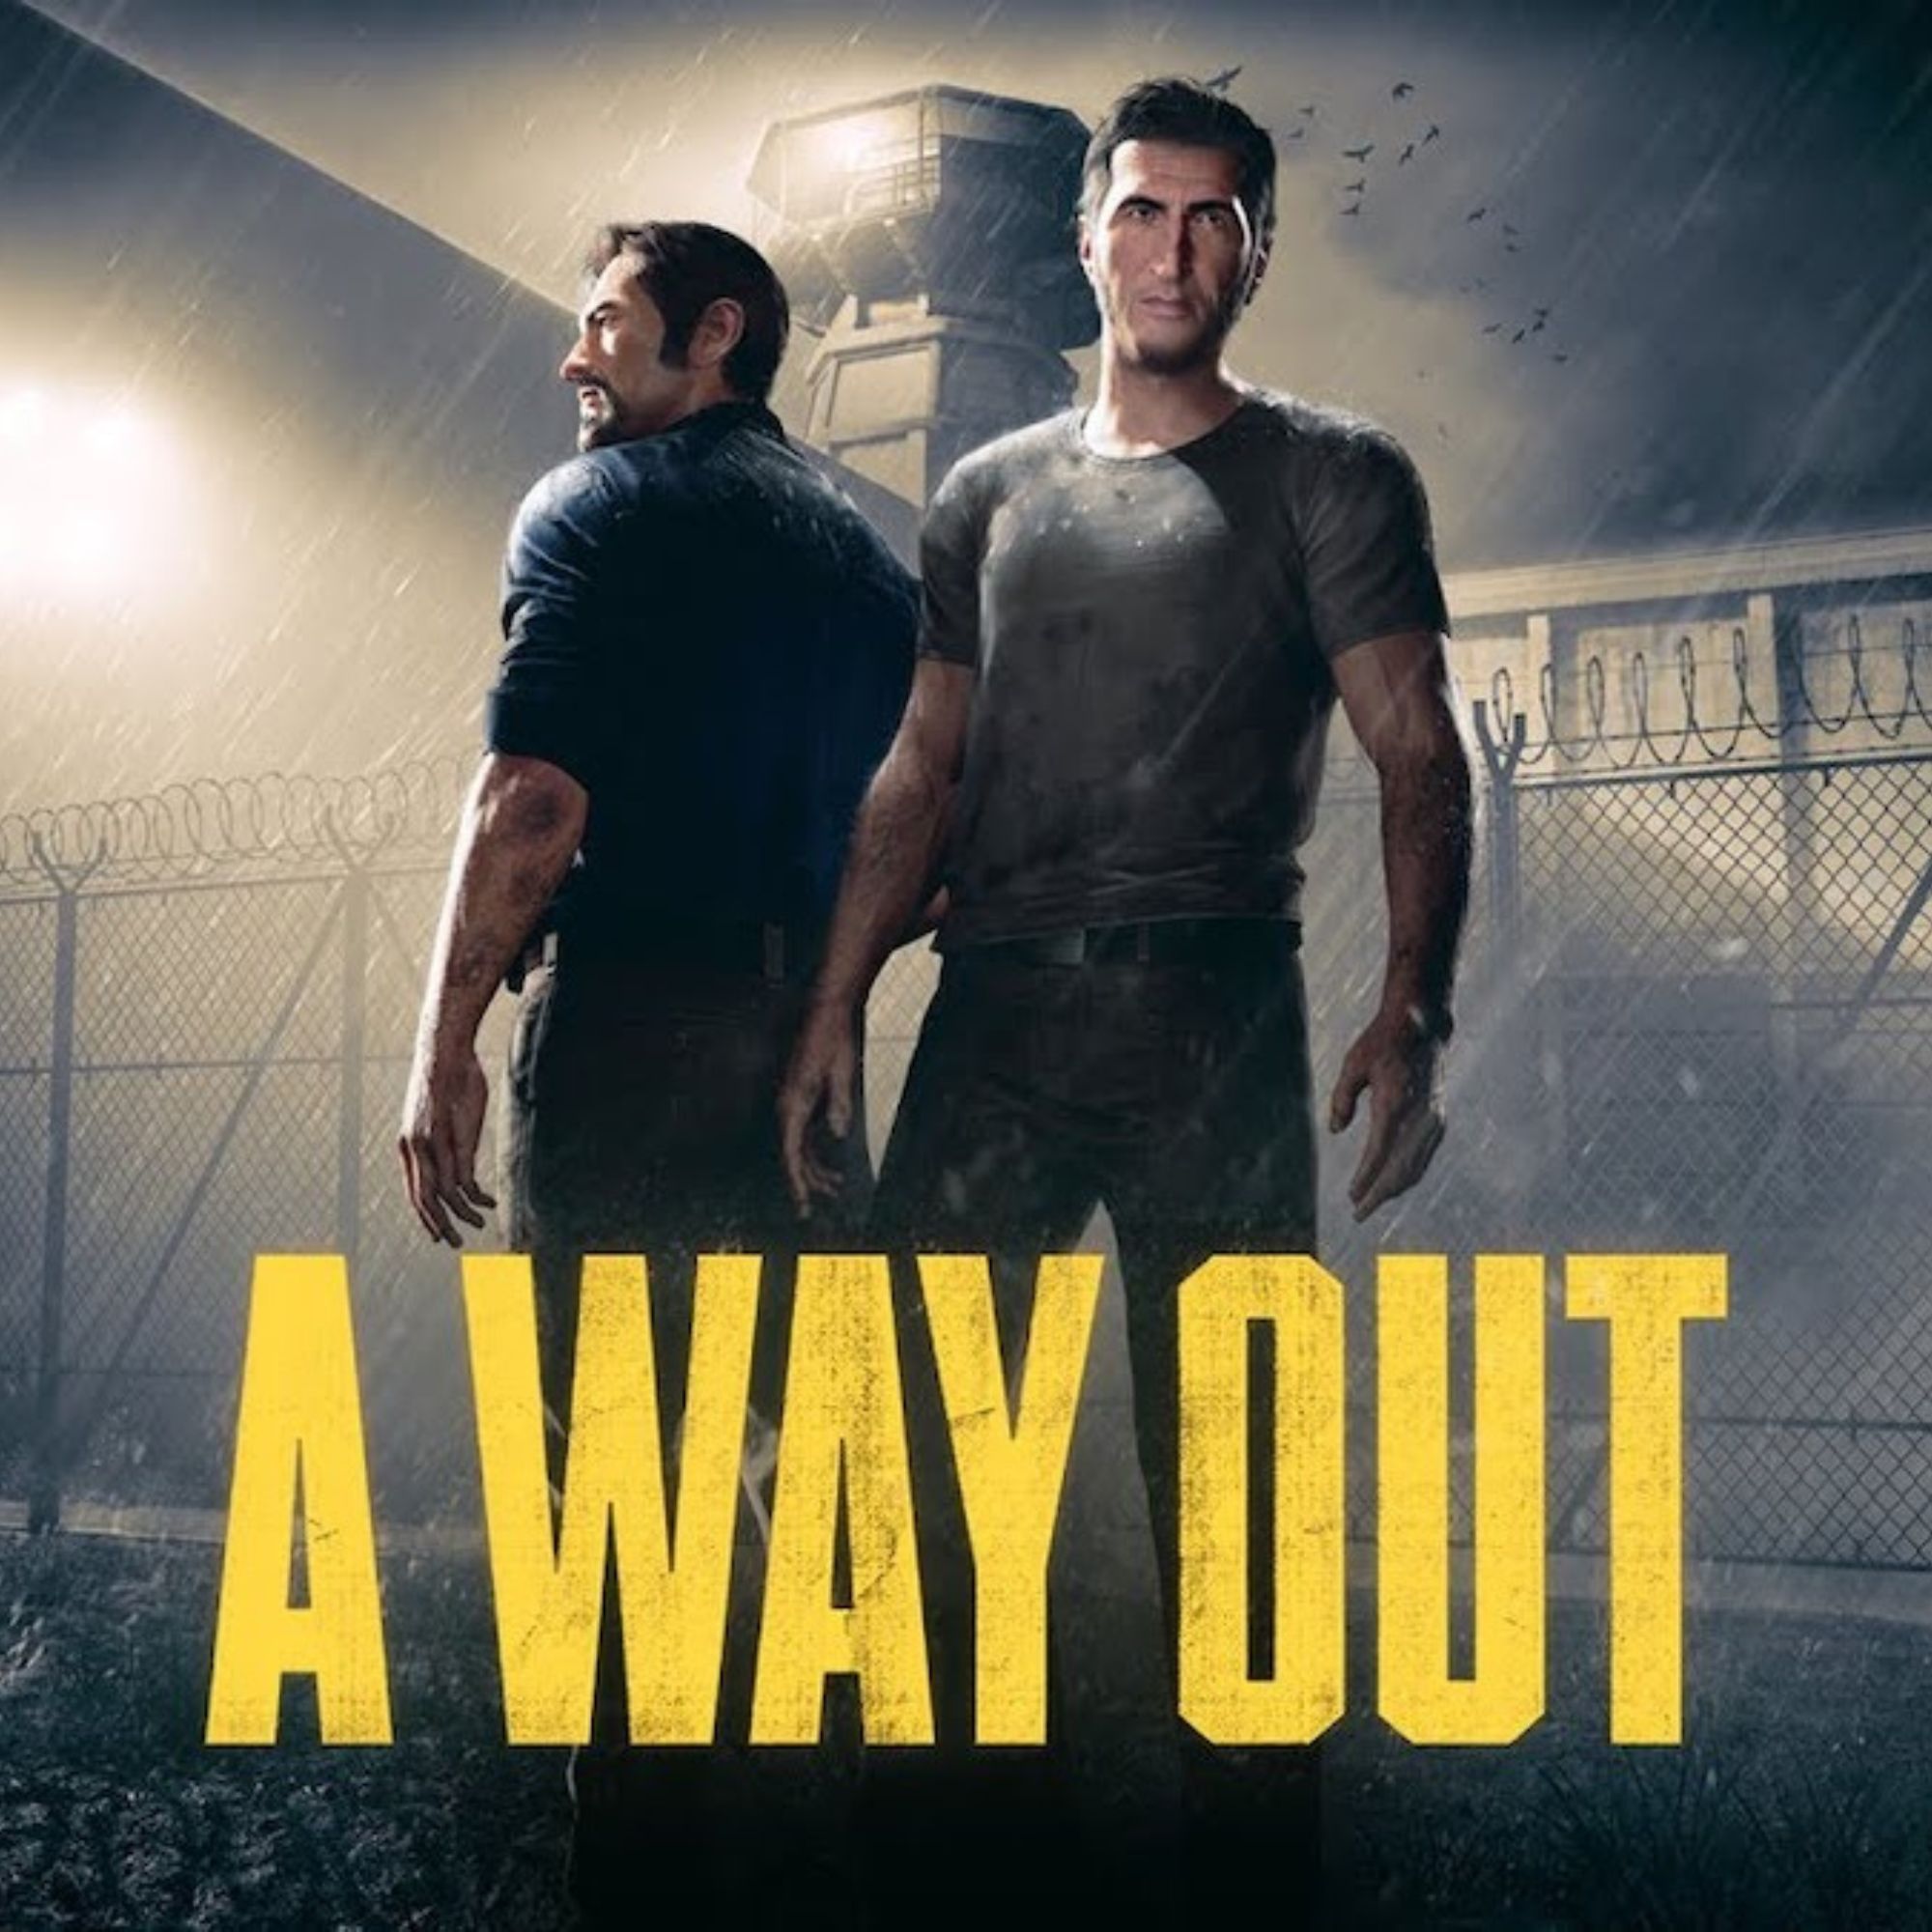 2000x2000 tag image for A Way Out. Two men stand in front of a prison fence behind the game's yellow title.